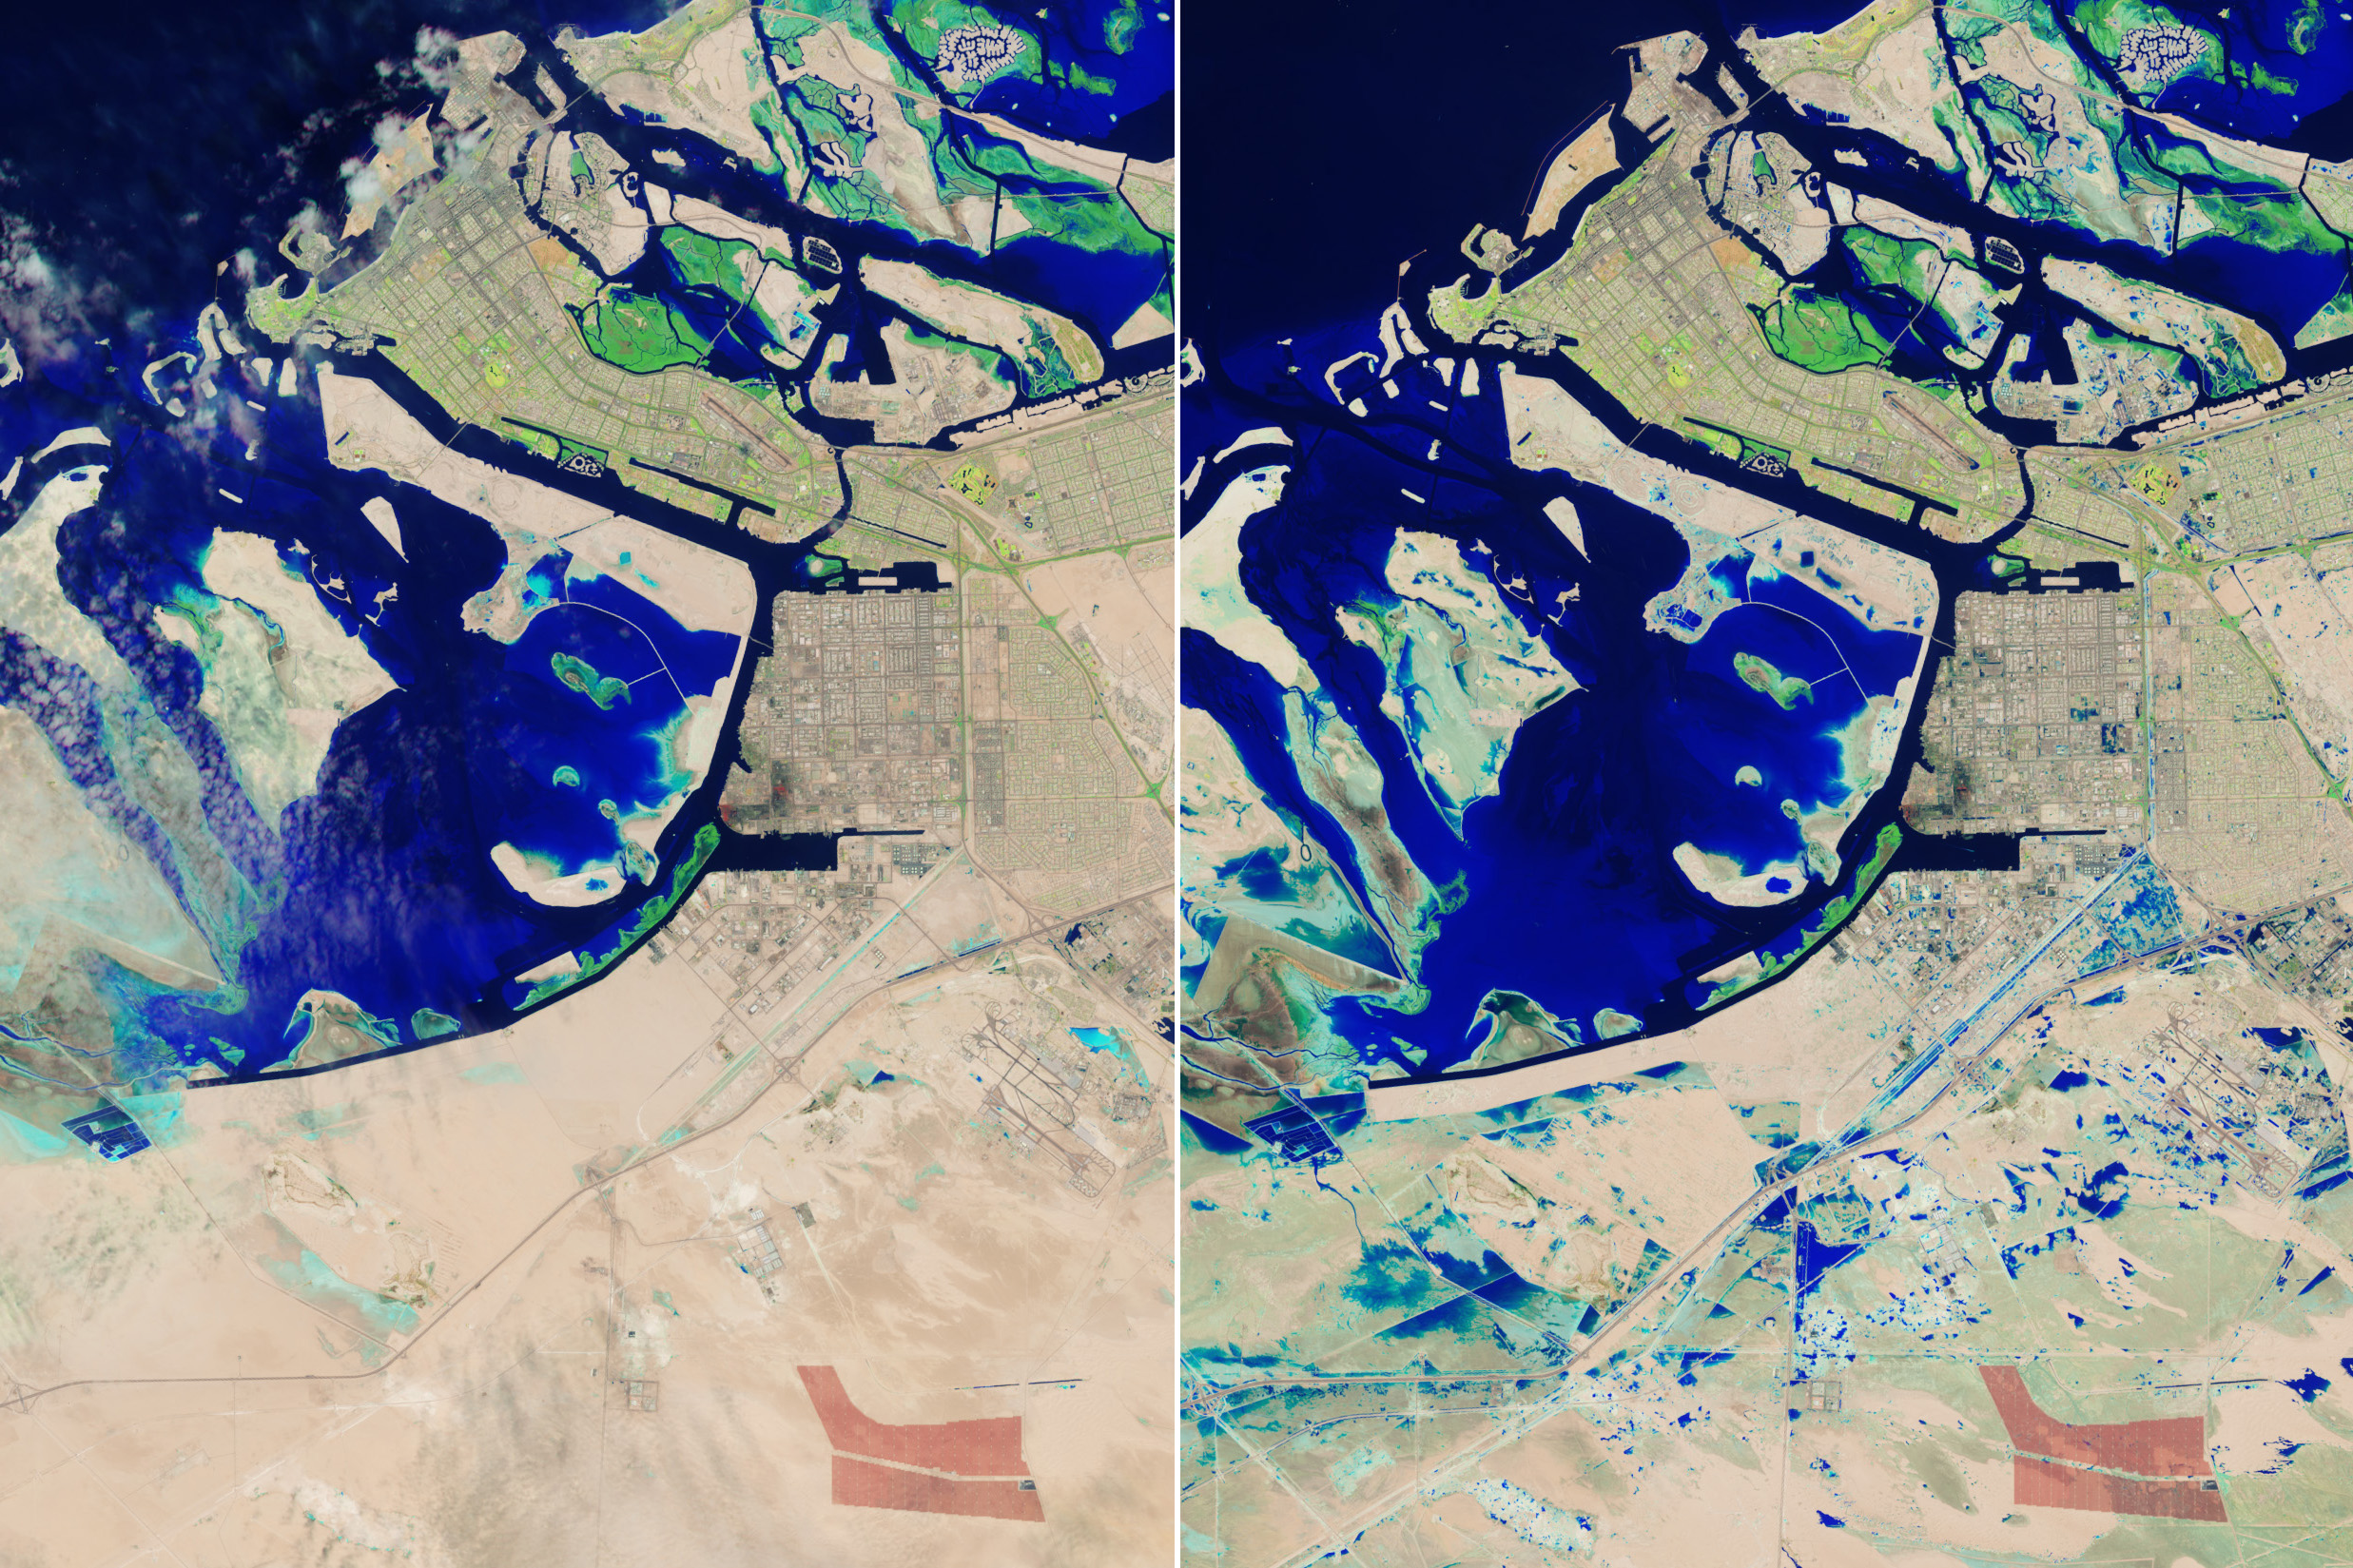 uae floods shown in incredible before-and-after satellite photos